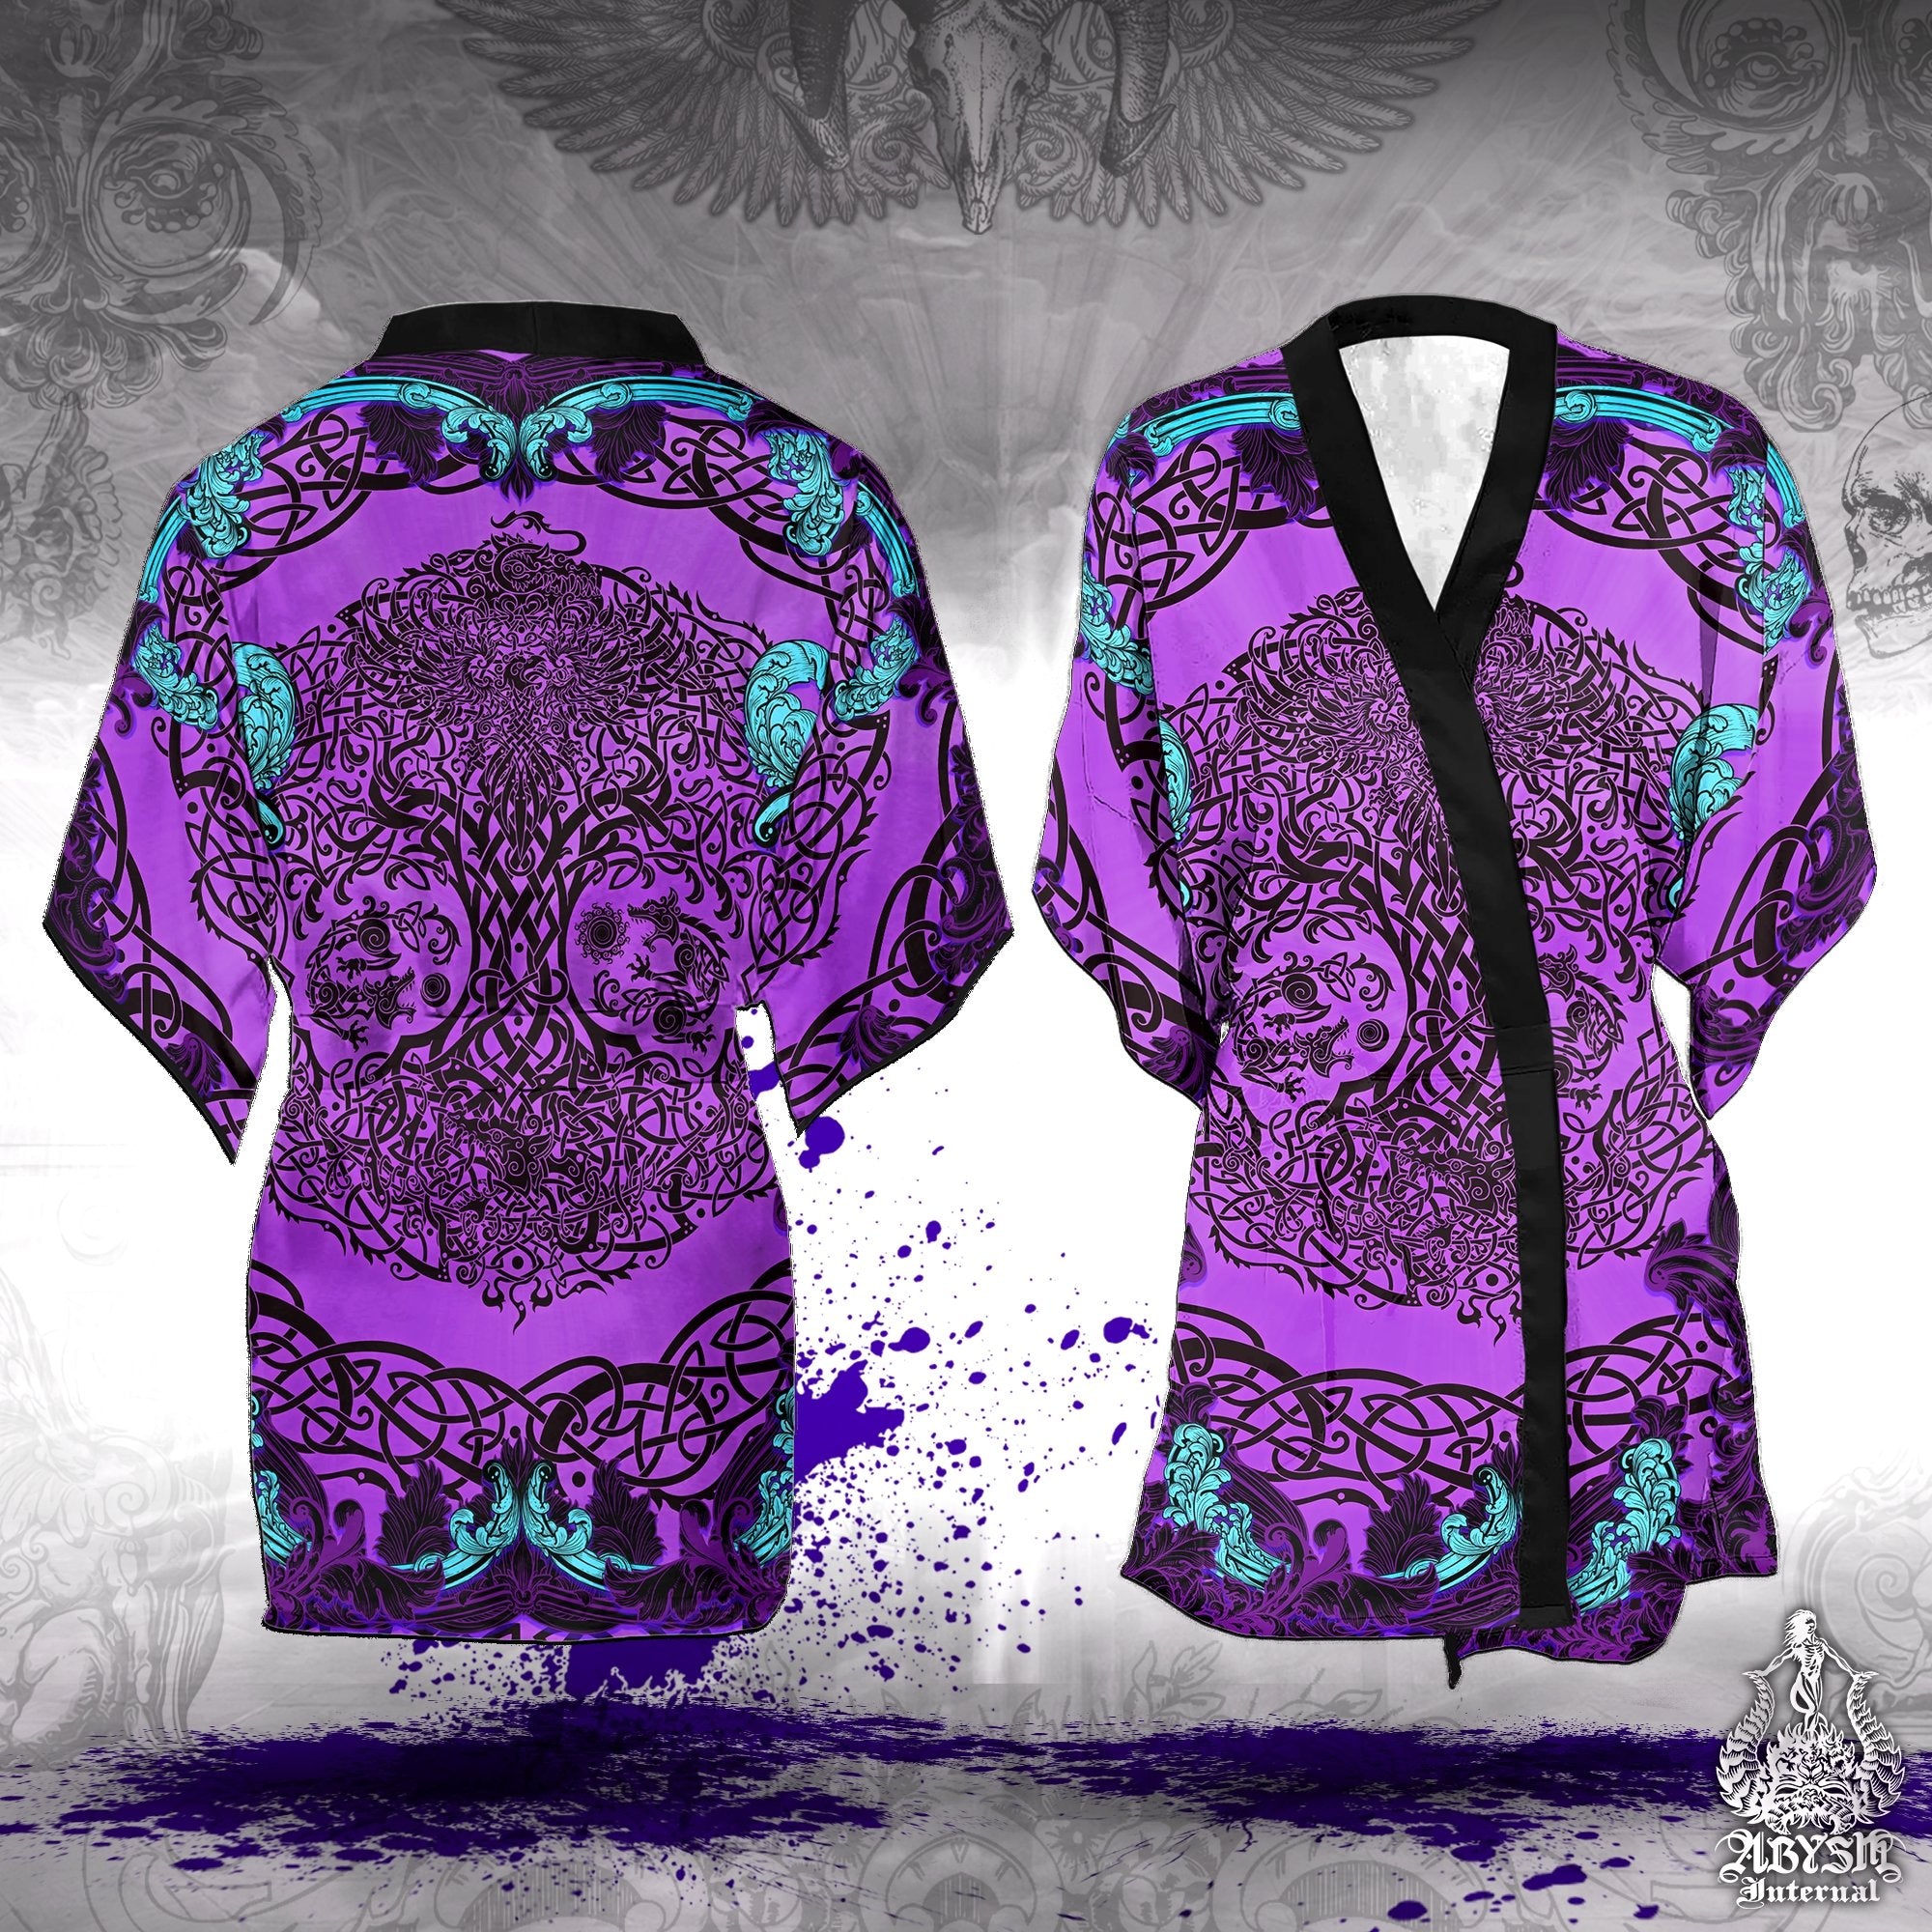 Viking Cover Up, Beach Outfit, Yggdrasil Party Kimono, Summer Festival Robe, Norse Indie and Alternative Clothing, Unisex - Tree of Life, Pastel Goth - Abysm Internal